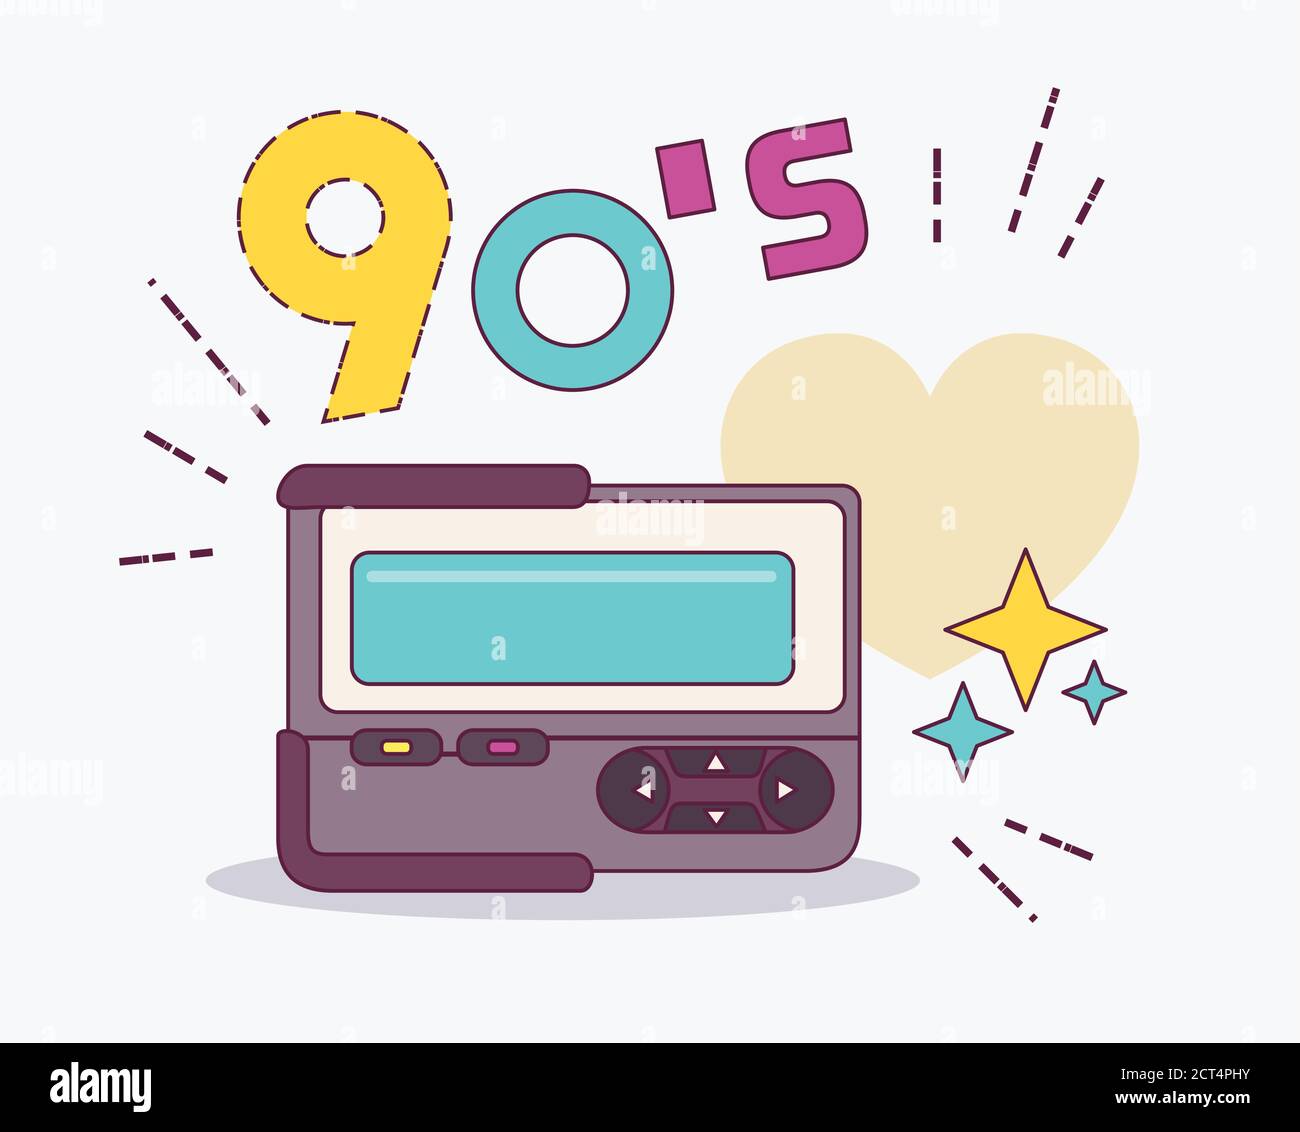 Retro pop culture item from 90s. Retro element collections - Soviet pager. USSR. Vector illustration. Stock Vector